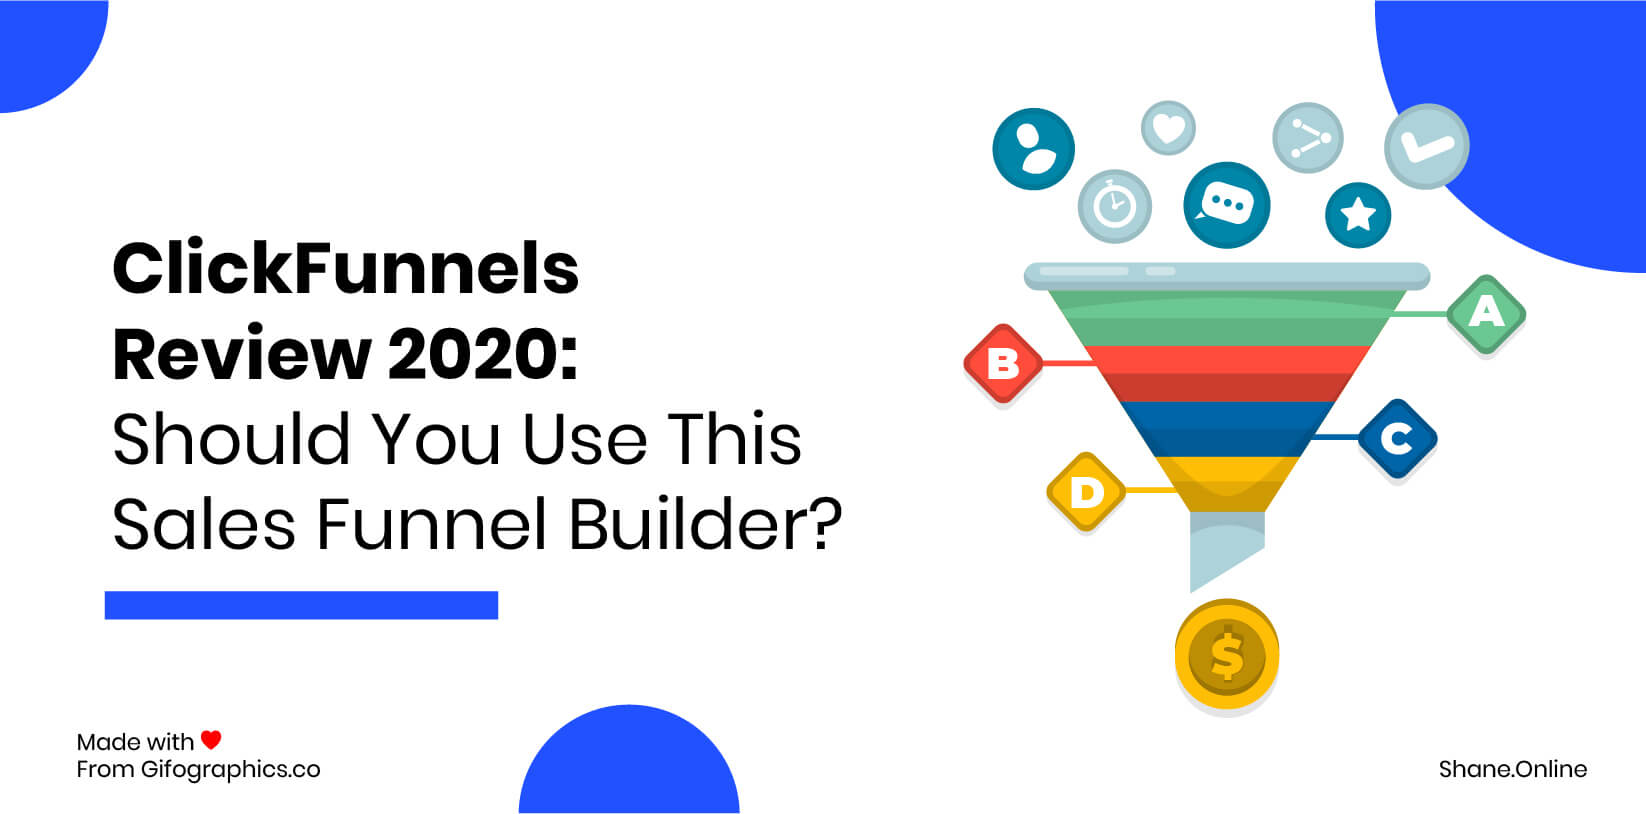 How Do You Delete A Funnel On Clickfunnels?